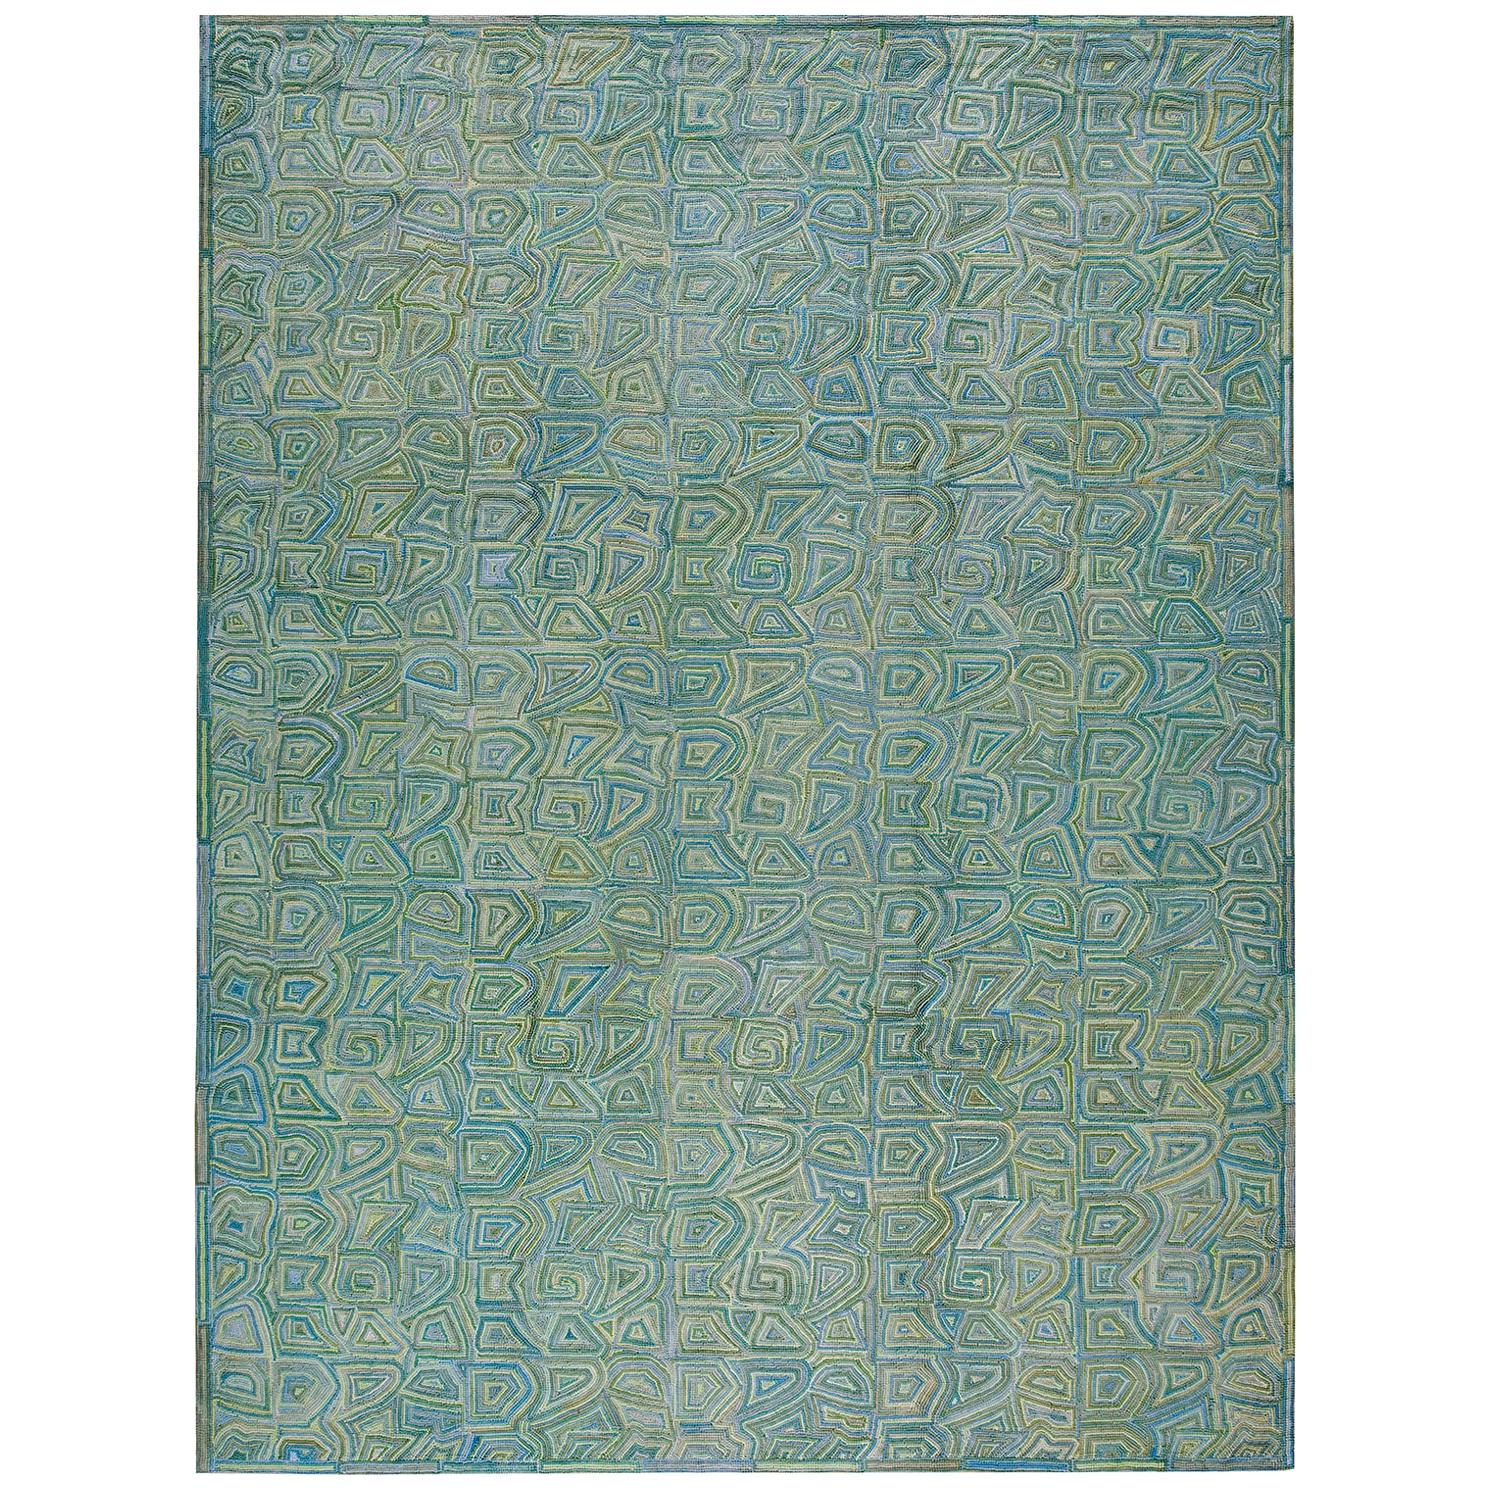 Contemporary American Hooked Rug (6' x 9' - 182x 274) For Sale